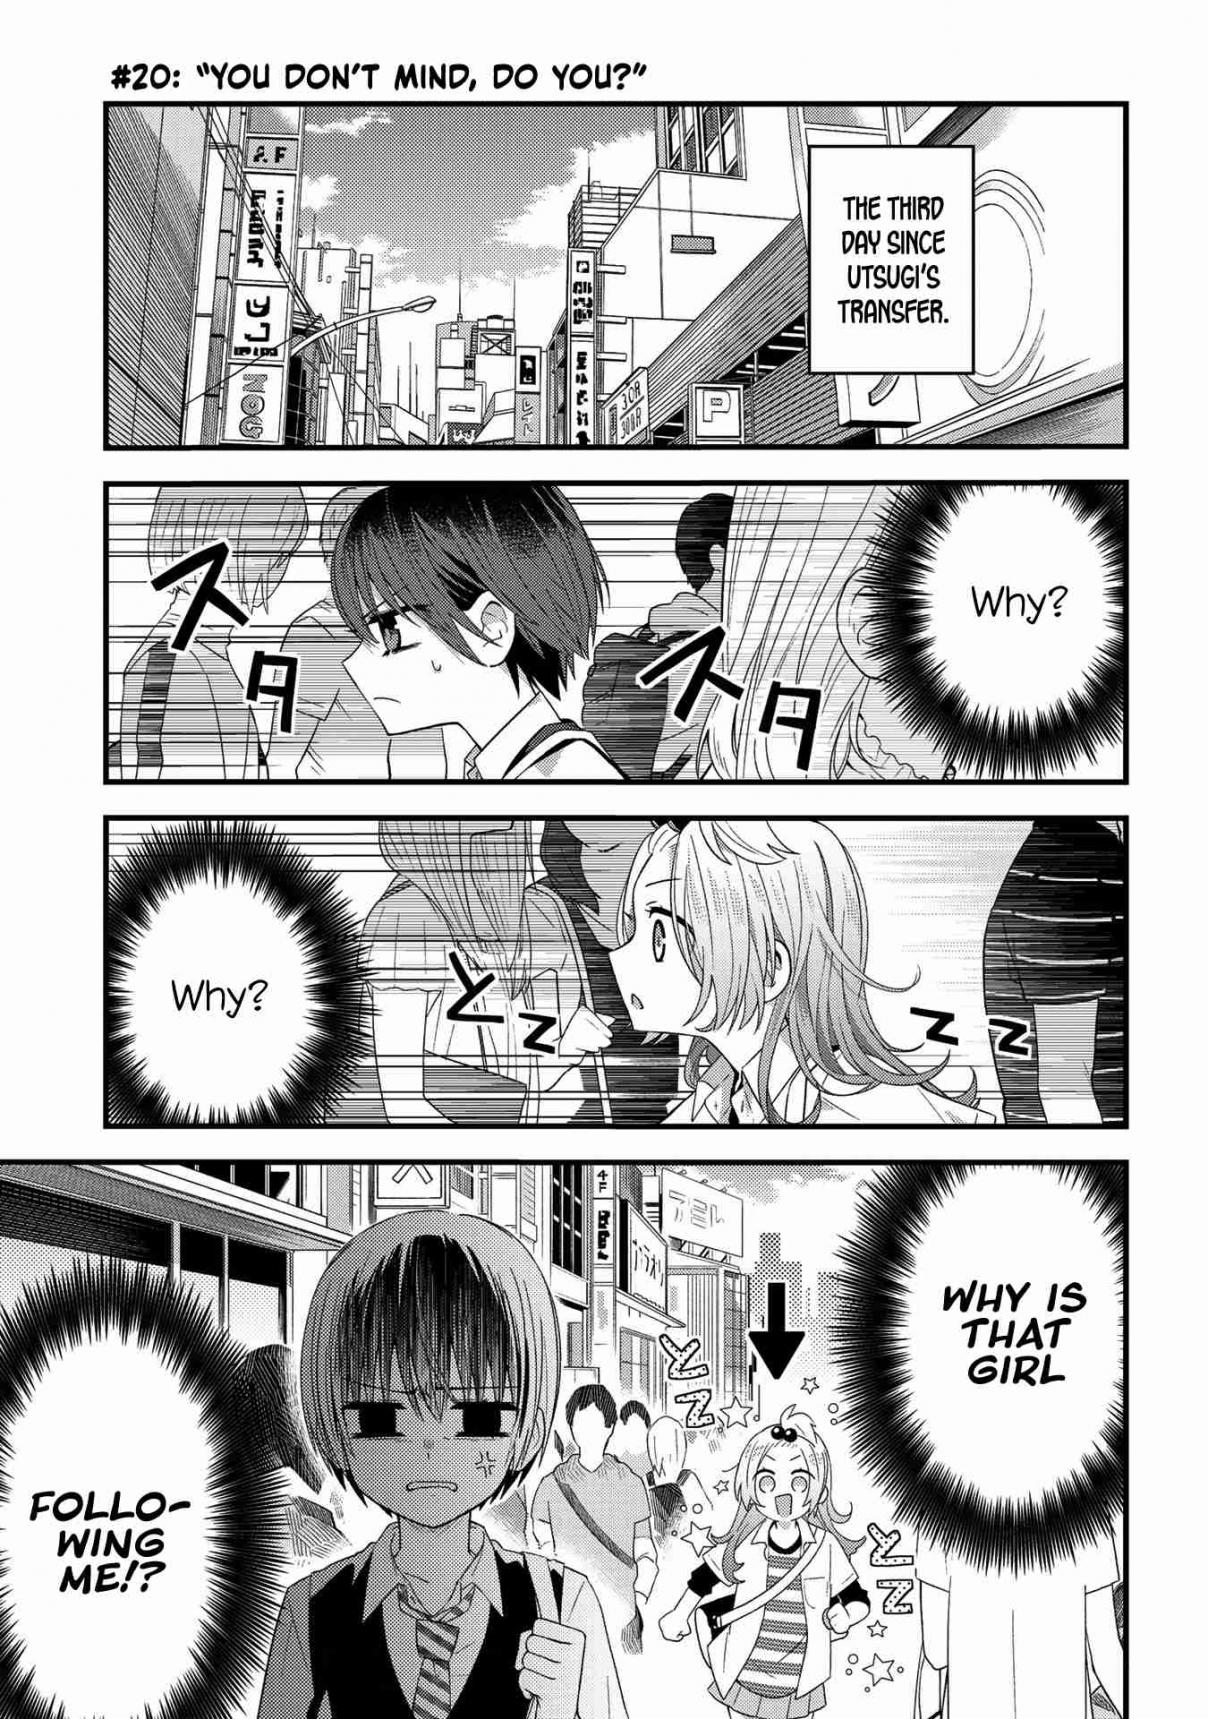 School Zone Vol. 1 Ch. 20 You don't mind, do you?